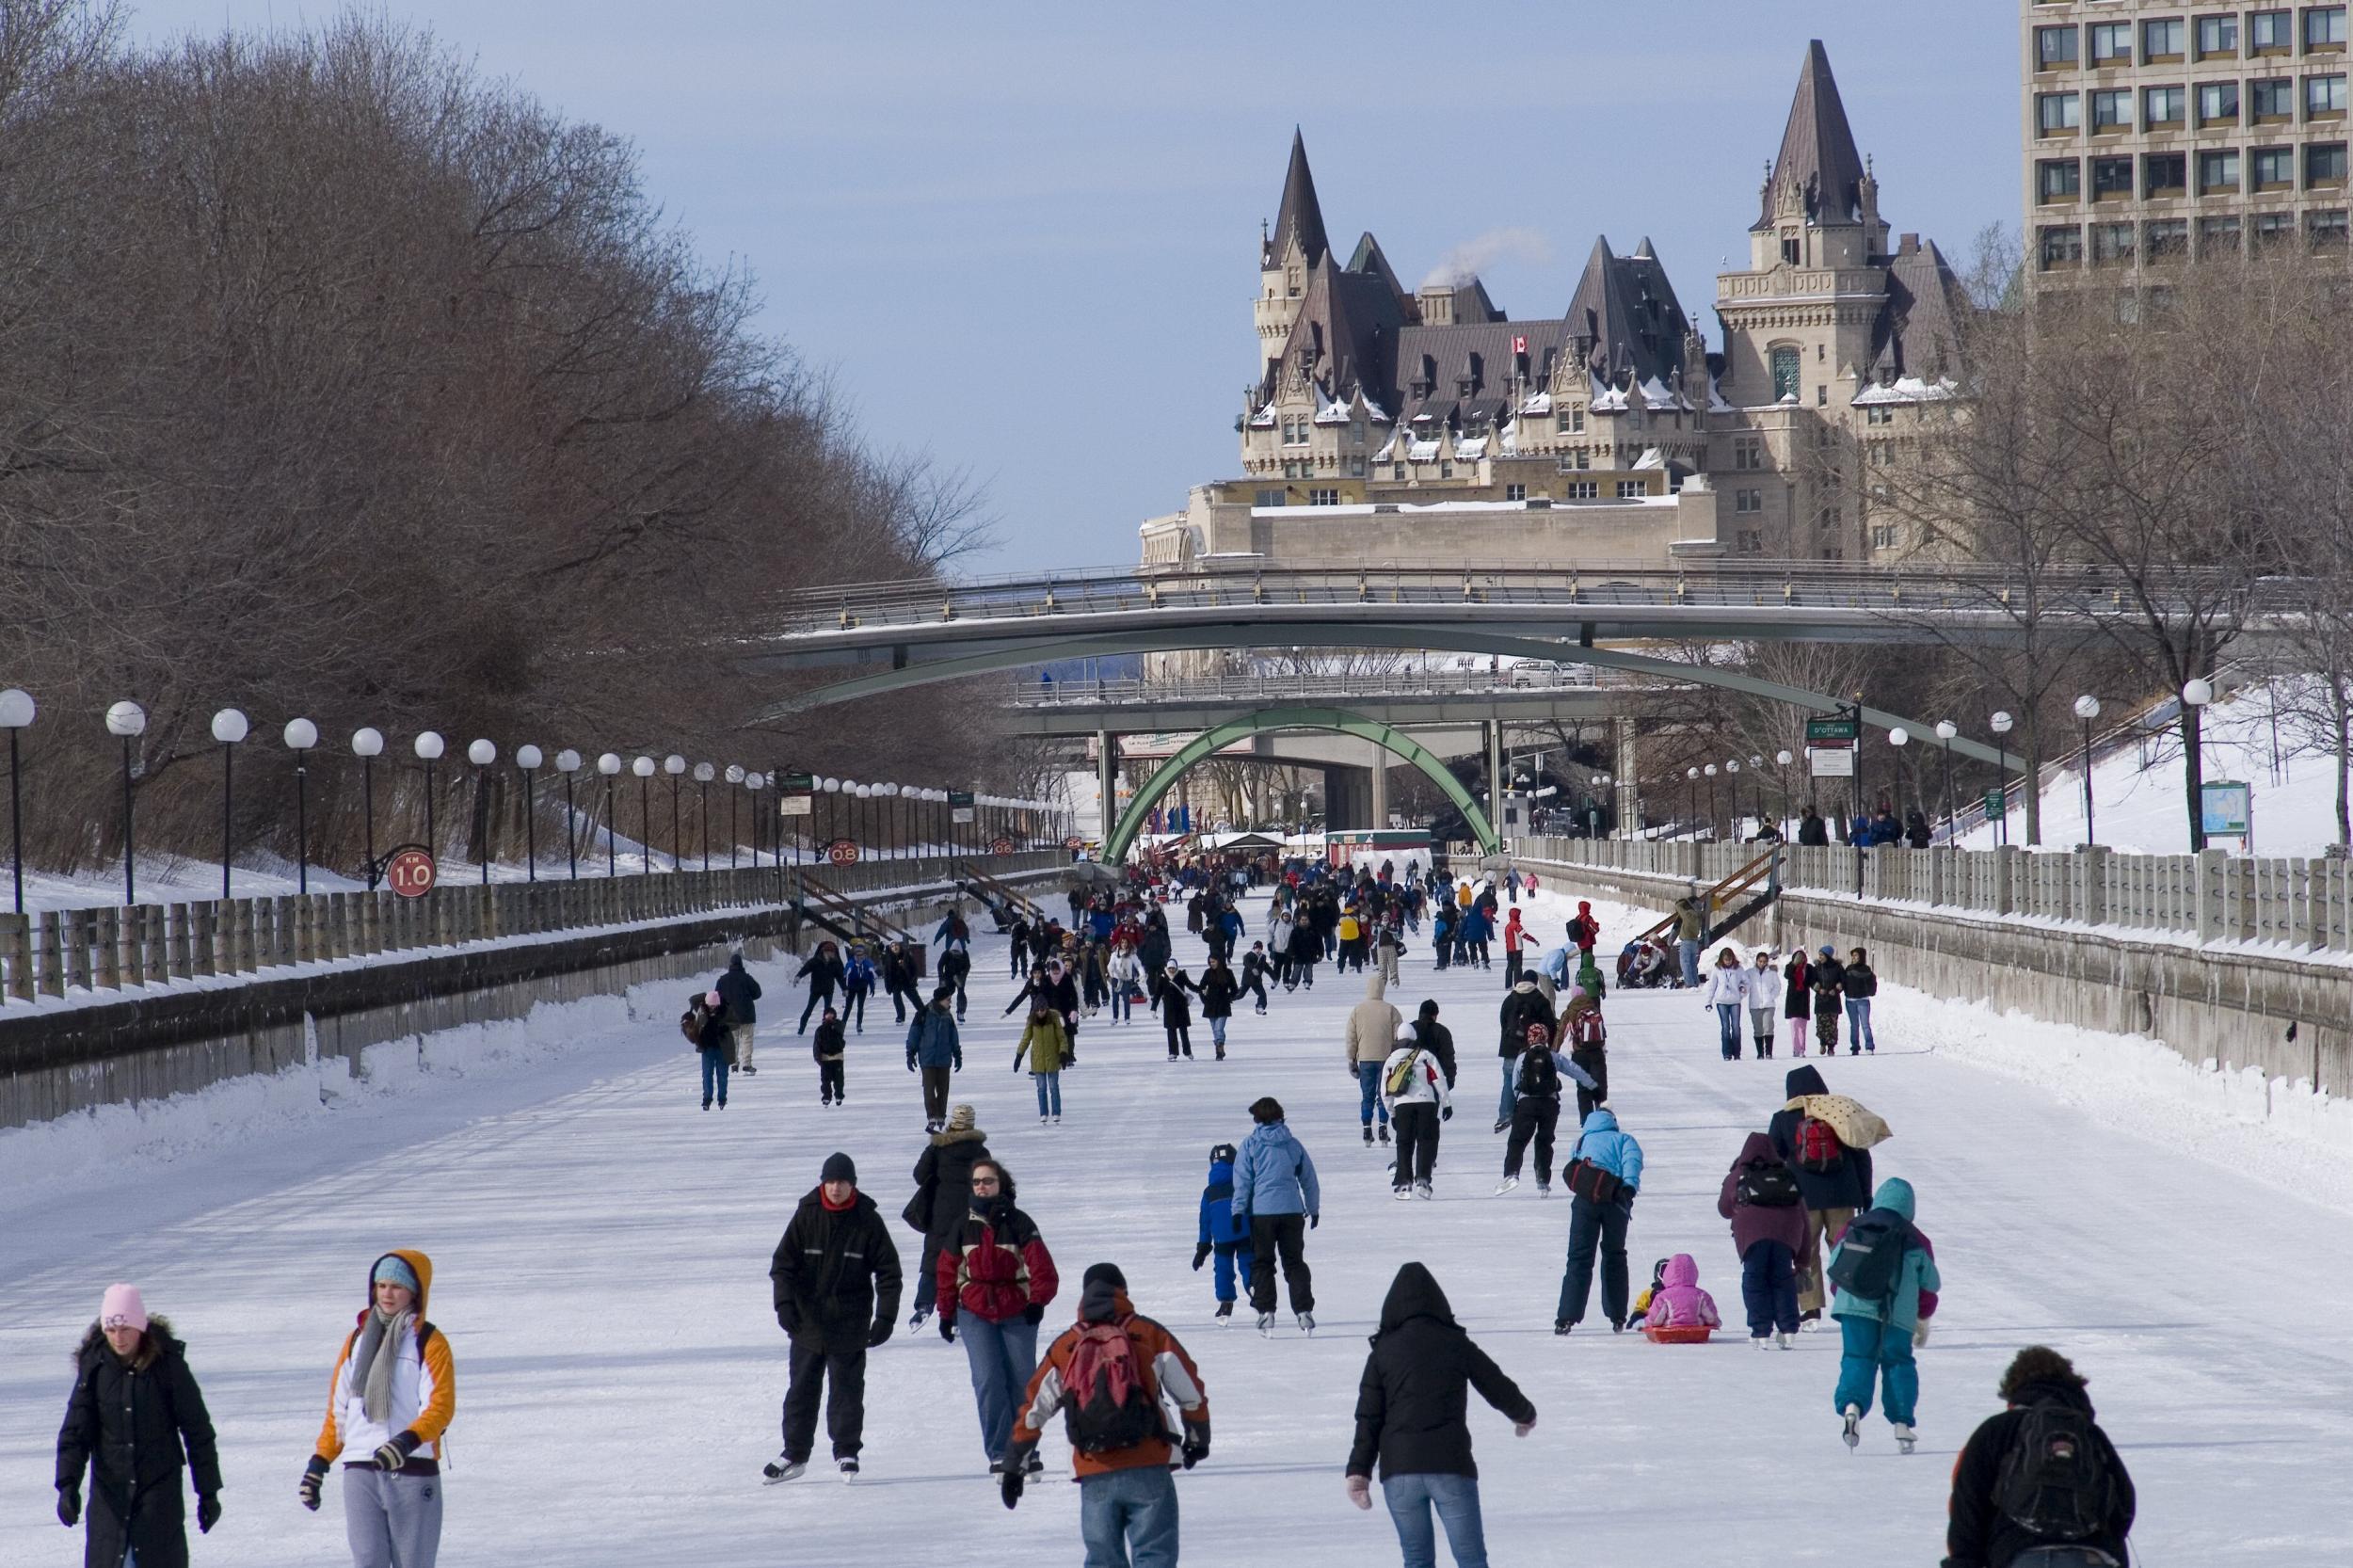 Get your skates on at Rideau Canal